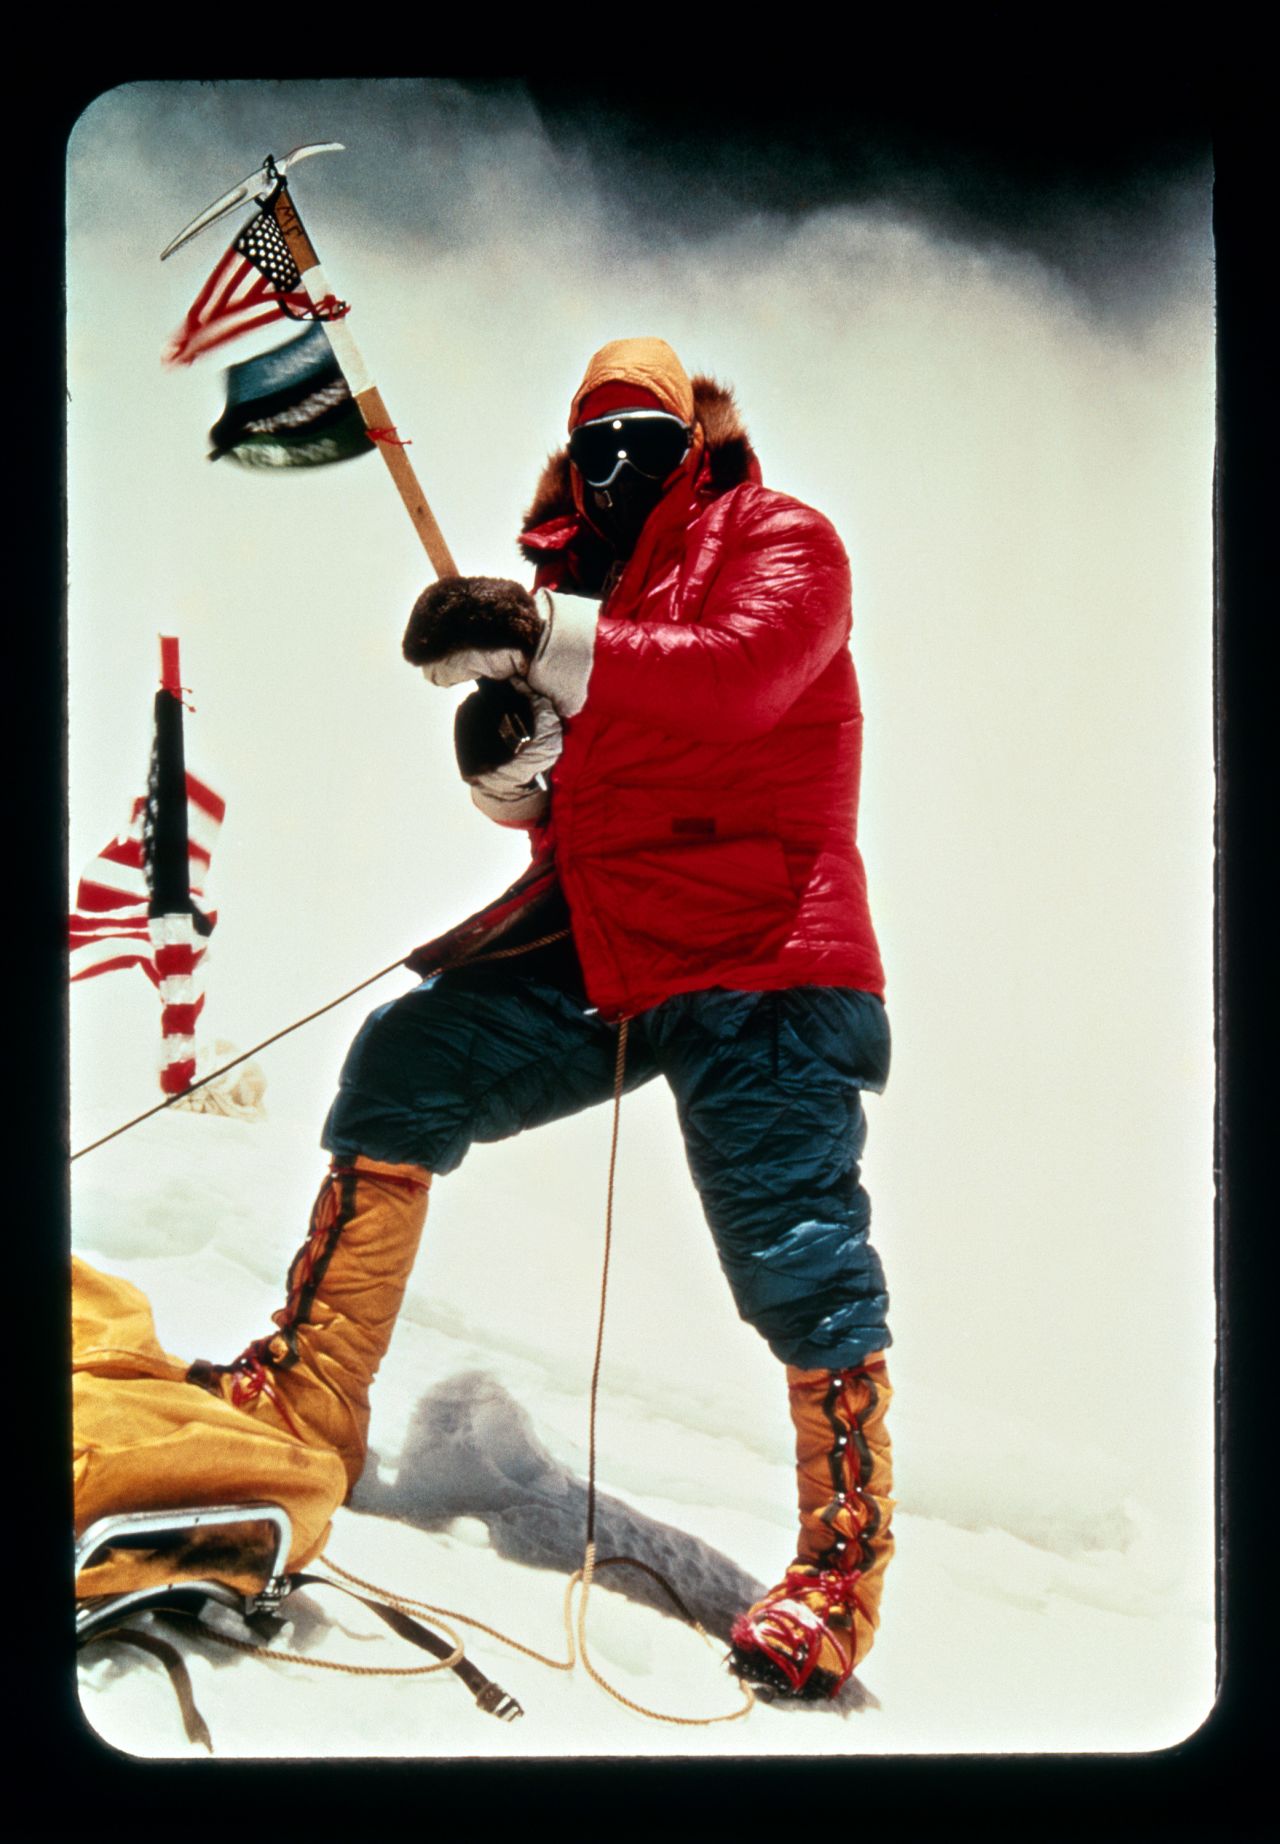 Whittaker summits Mount Everest on May 1, 1963, at 1 p.m.